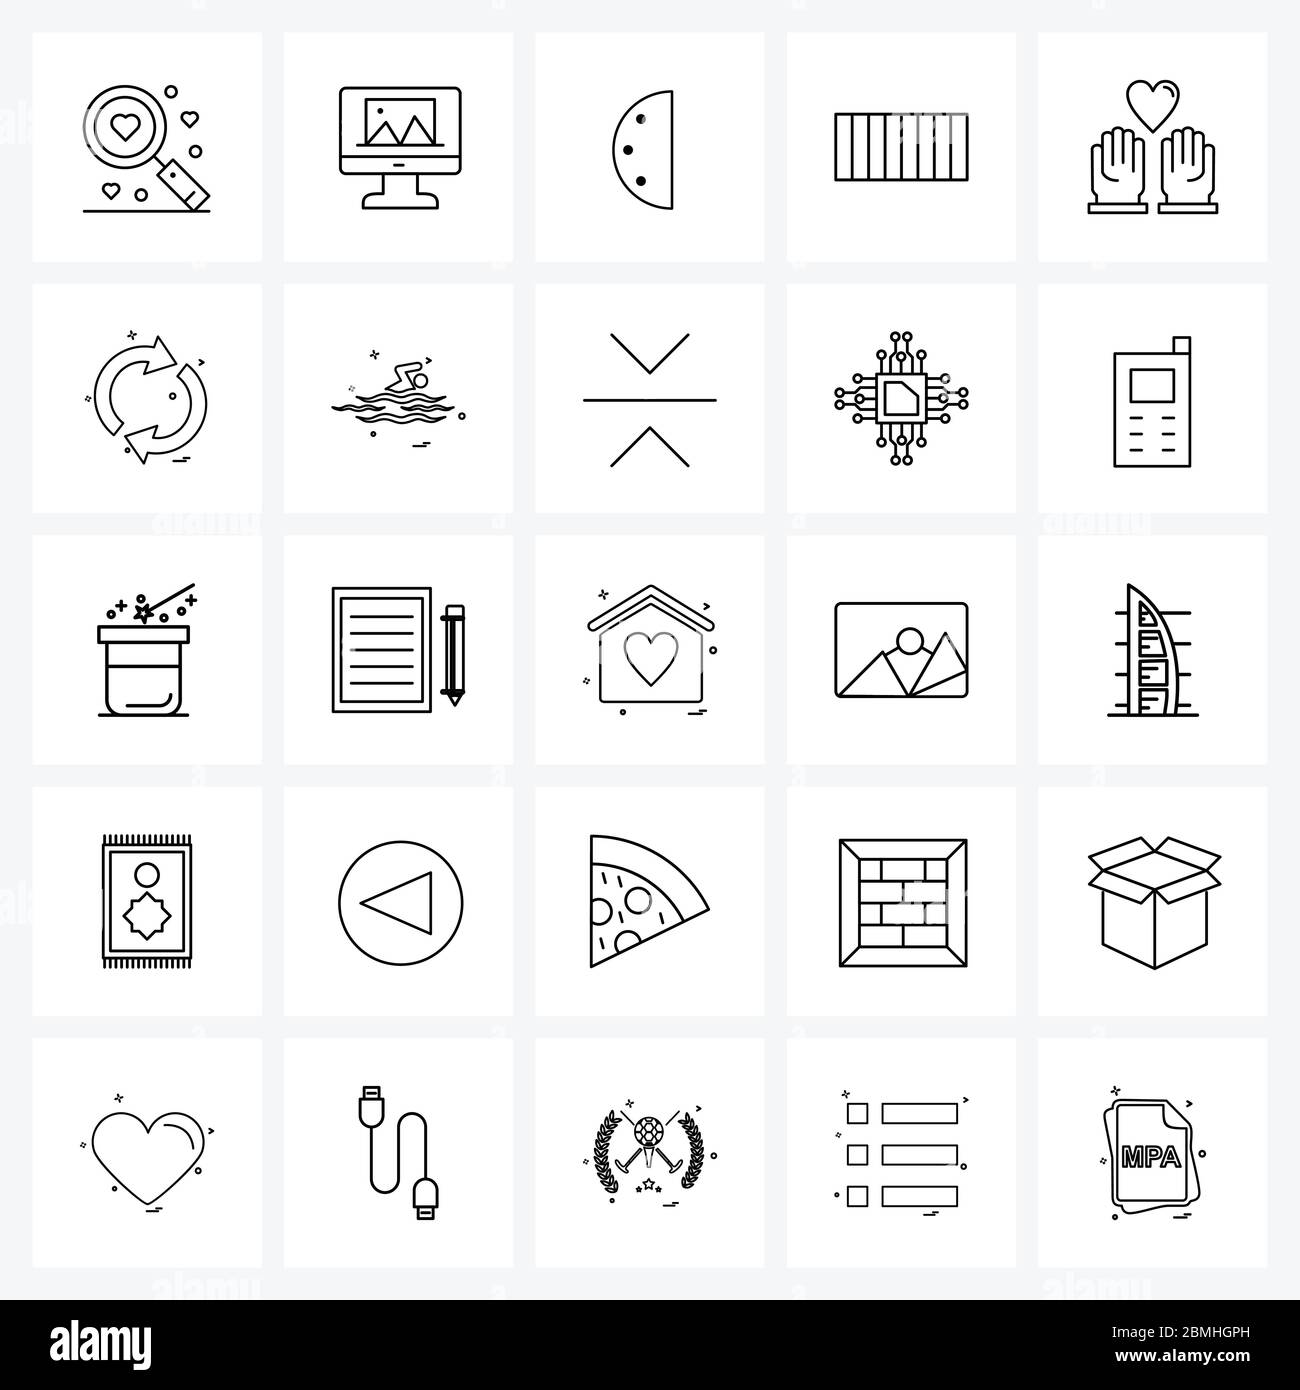 UI Set of 25 Basic Line Icons of pray, loading, clock, container, six ...